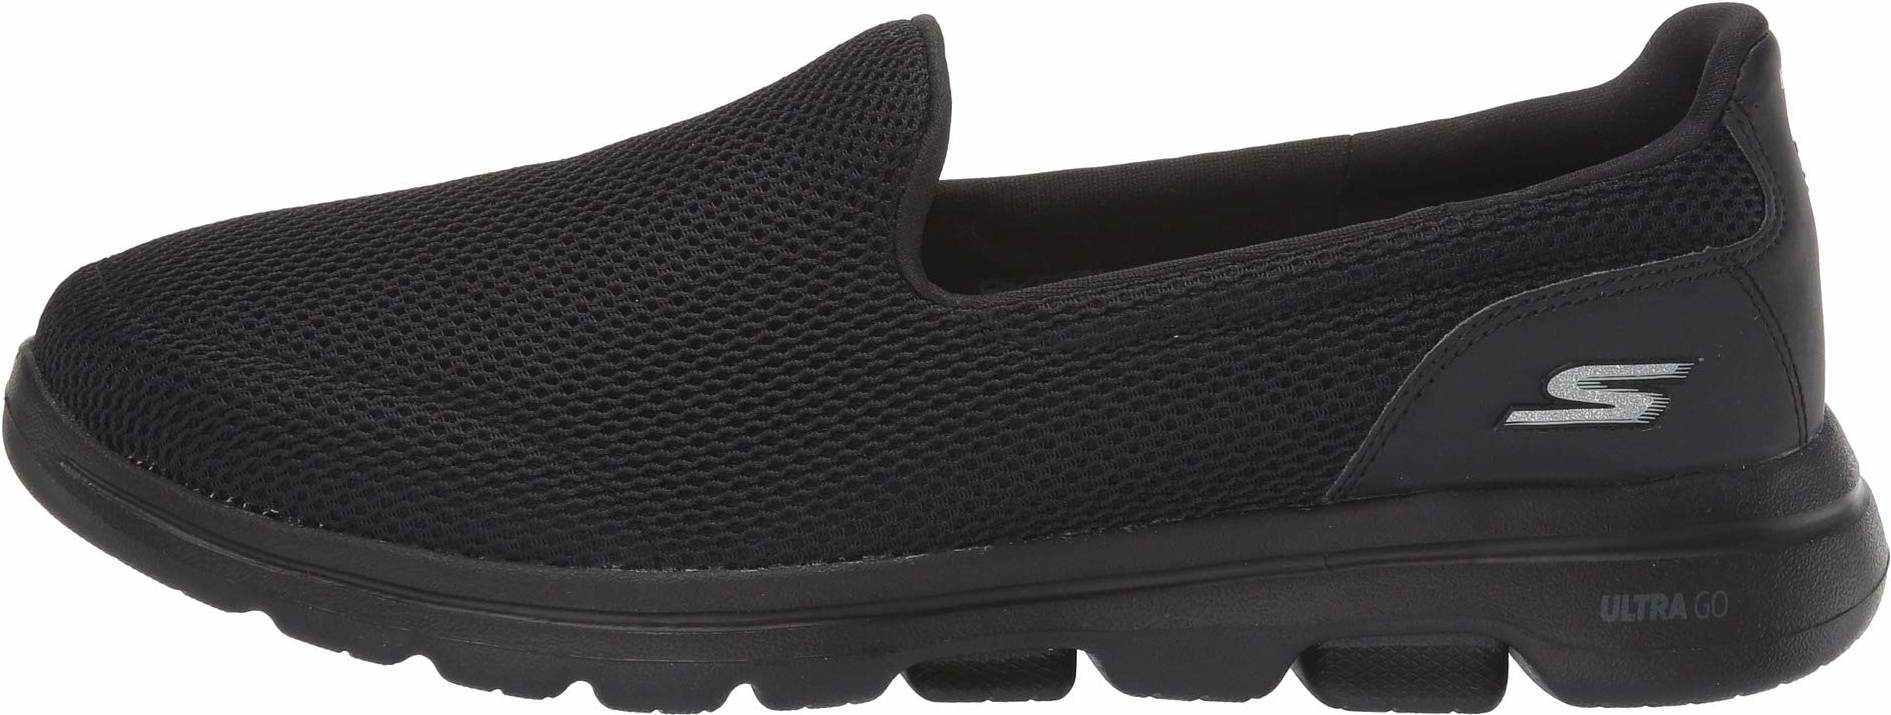 Only $51 + Review of Skechers GOwalk 5 